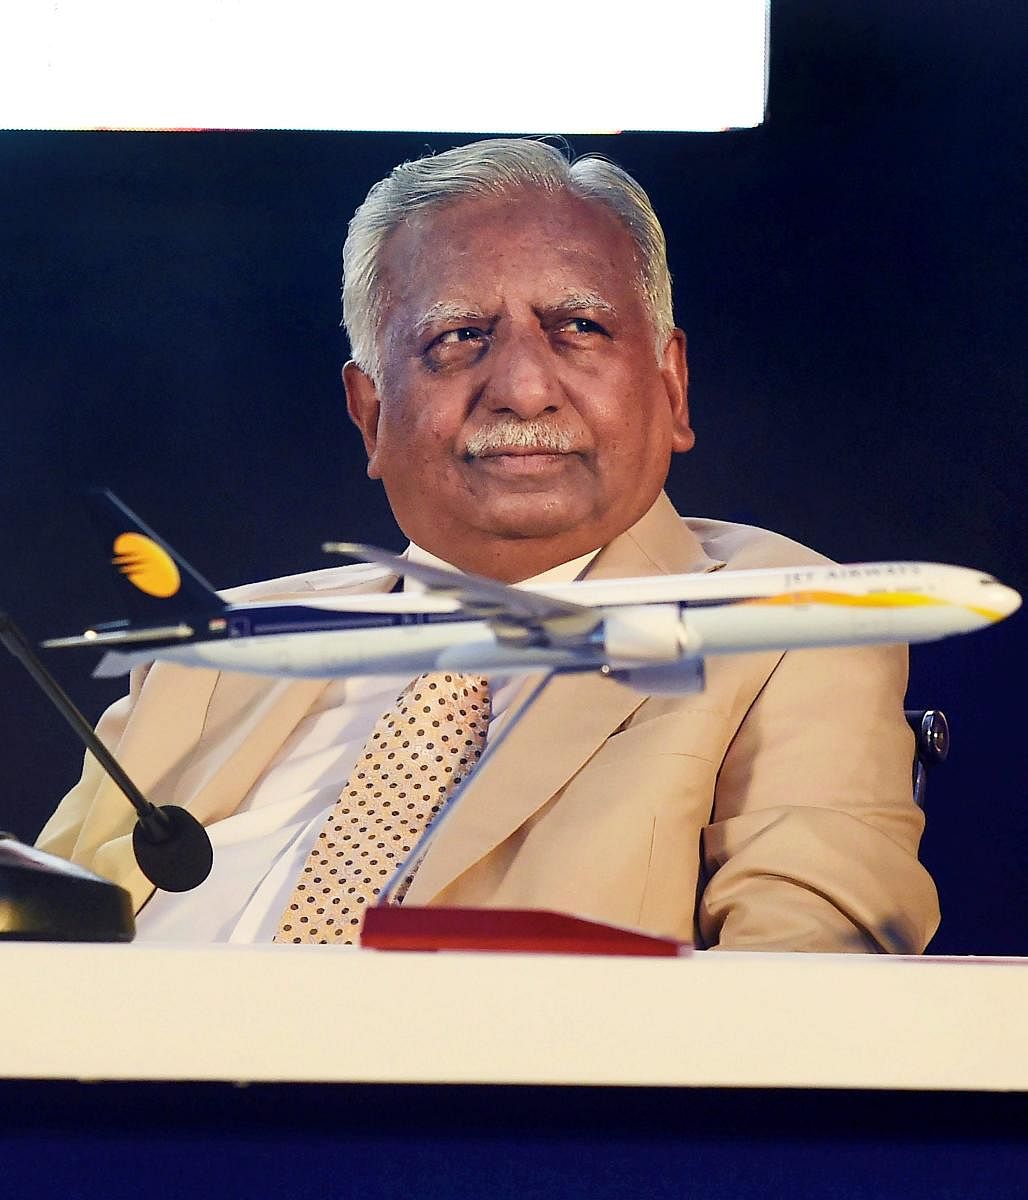 Delhi High Court refused to allow Jet Airways founder Naresh Goyal to go abroad and sought the response of the Centre on his plea challenging a lookout circular (LOC) issued against him. (PTI Photo)